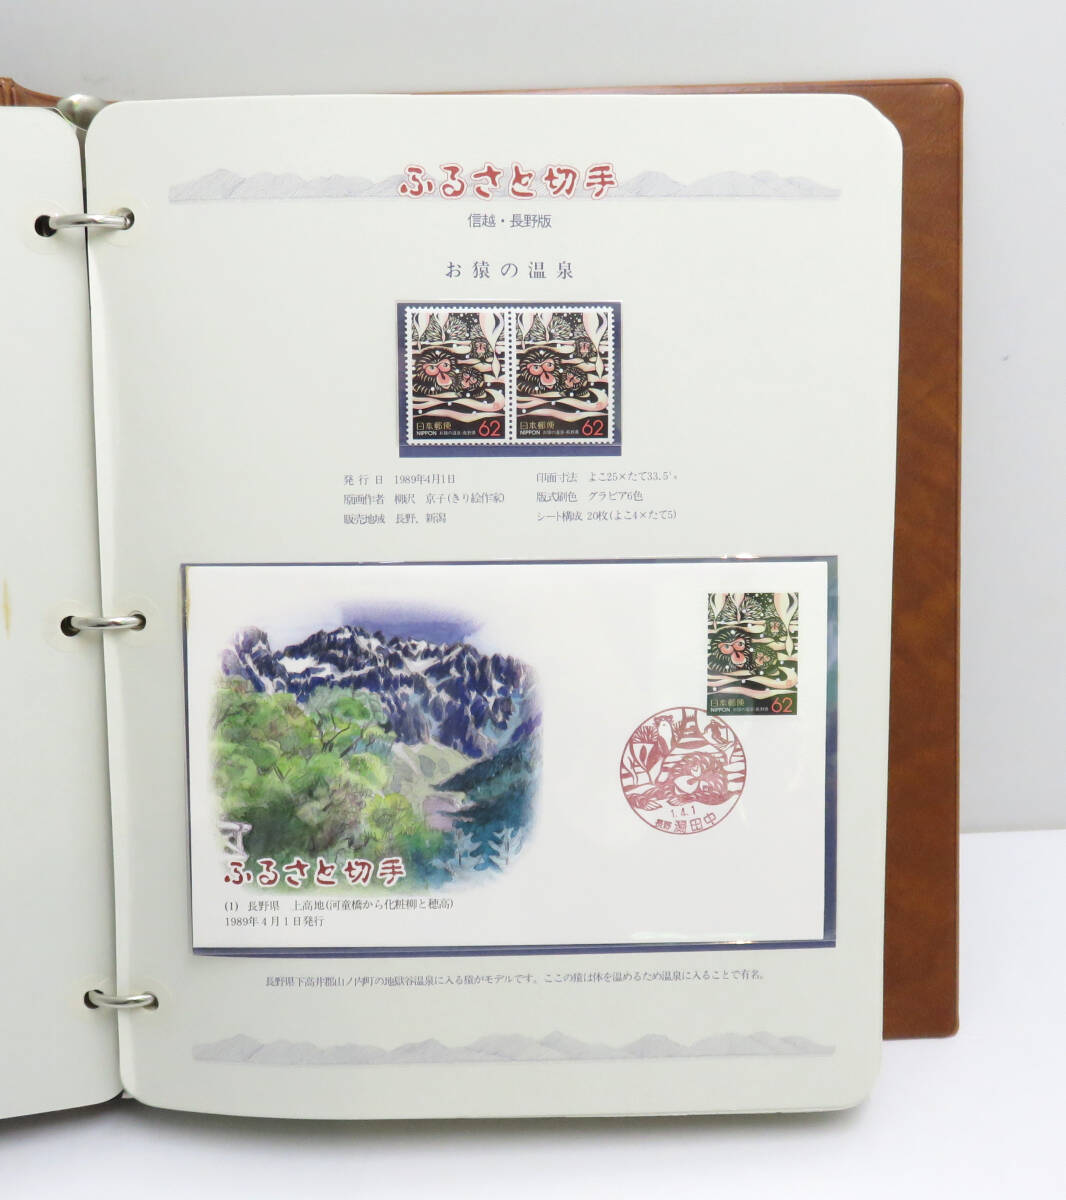 * storage goods * Furusato Stamp collection all 36 page 62 jpy stamp face value 4340 jpy 1989 year ~ First Day Cover commemorative stamp album .. service company 